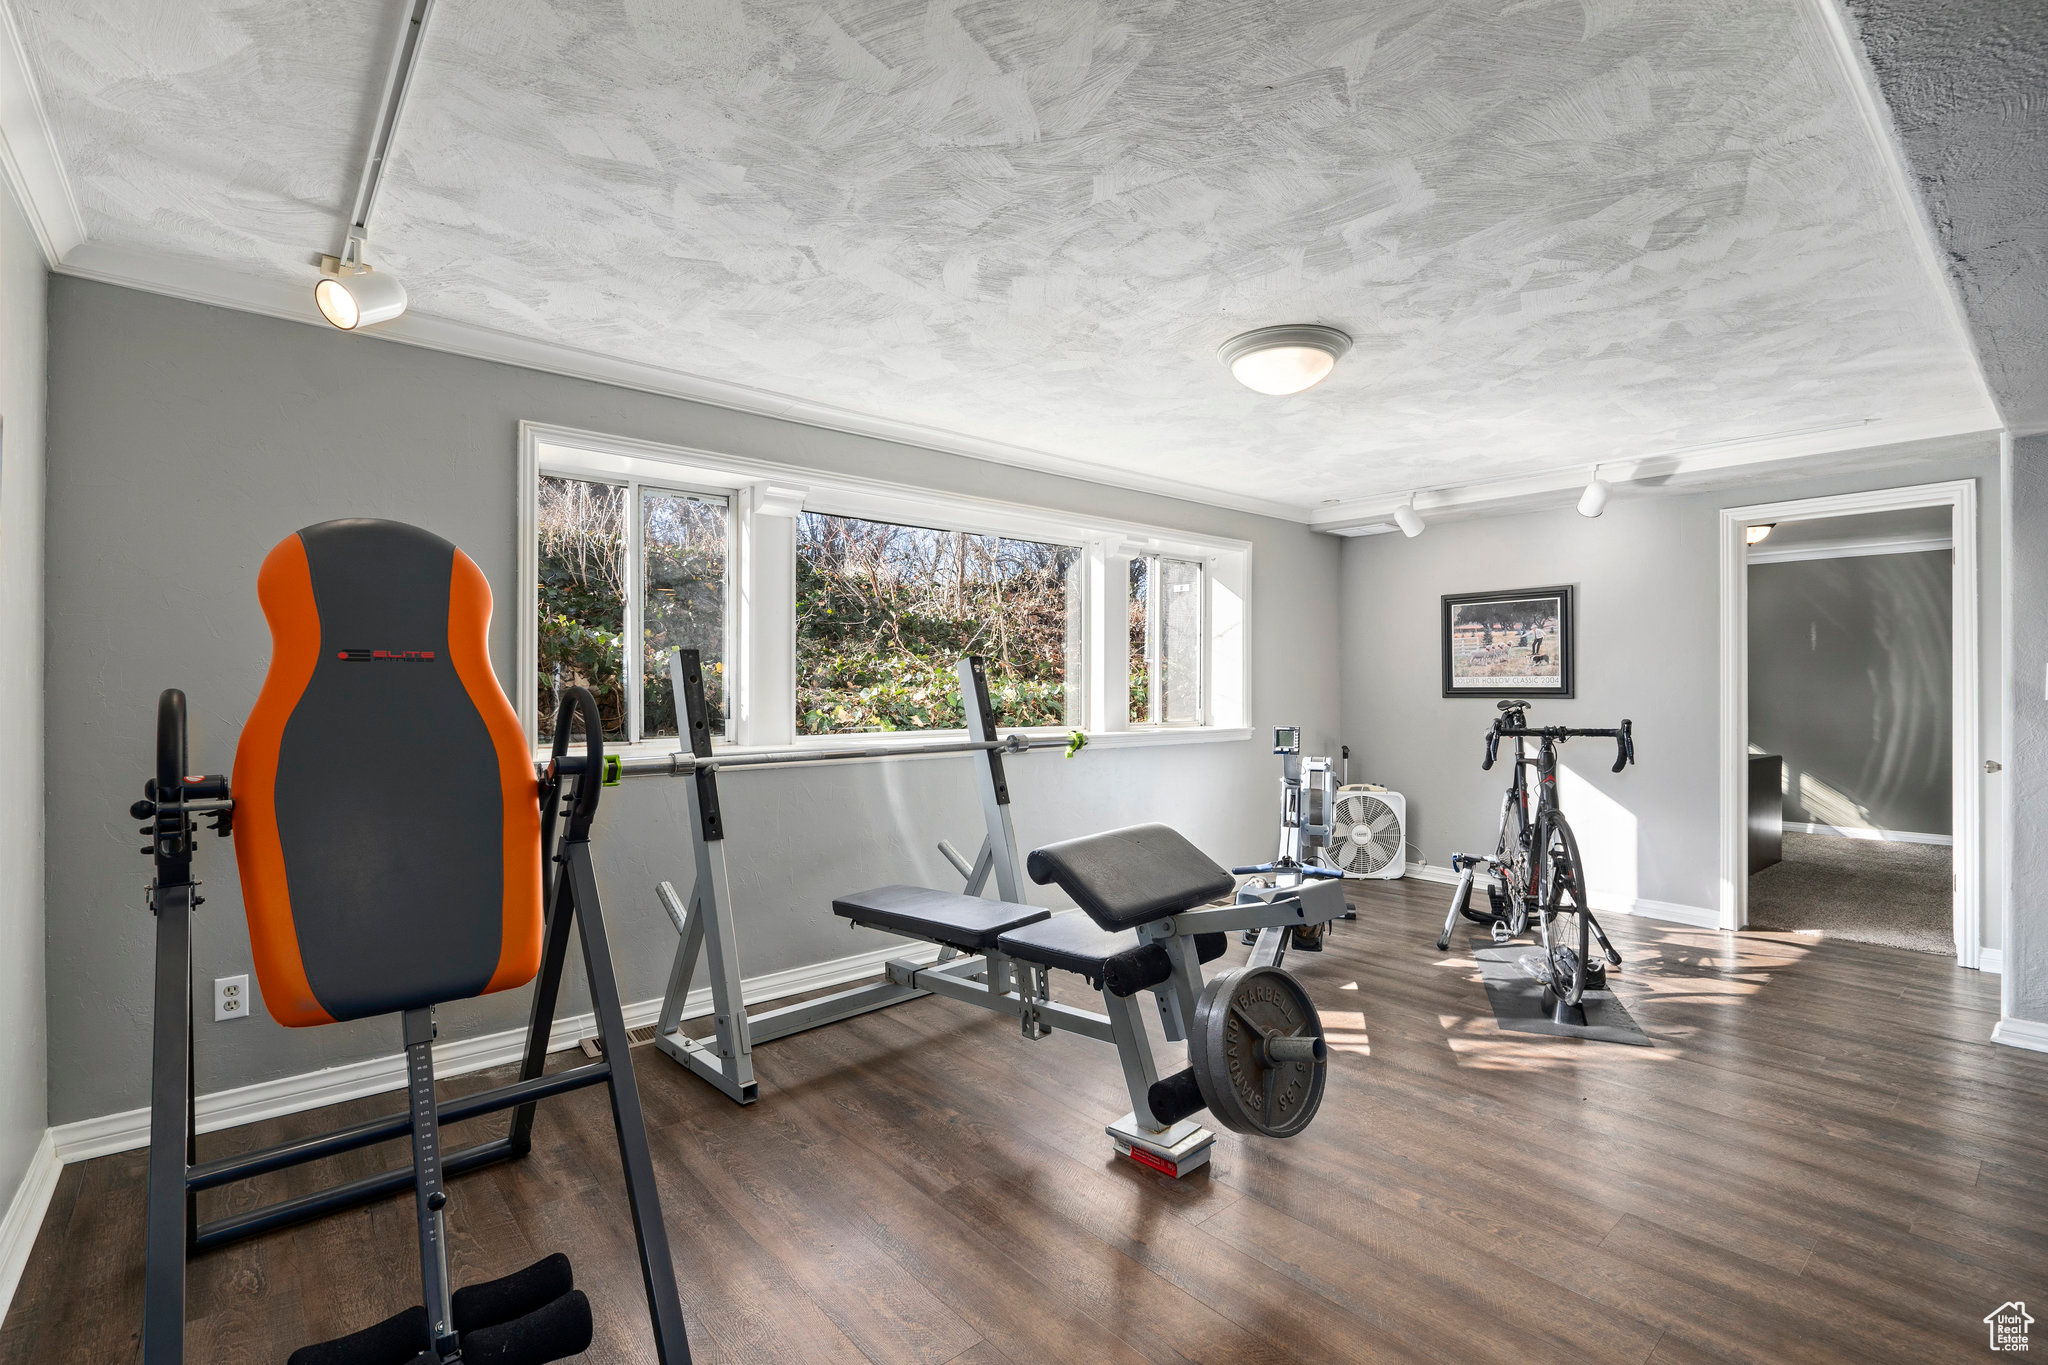 Exercise room with dark hardwood / wood-style floors, rail lighting, crown molding, and a textured ceiling. Ample space for workout equipment, billiards, ping pong or foosball